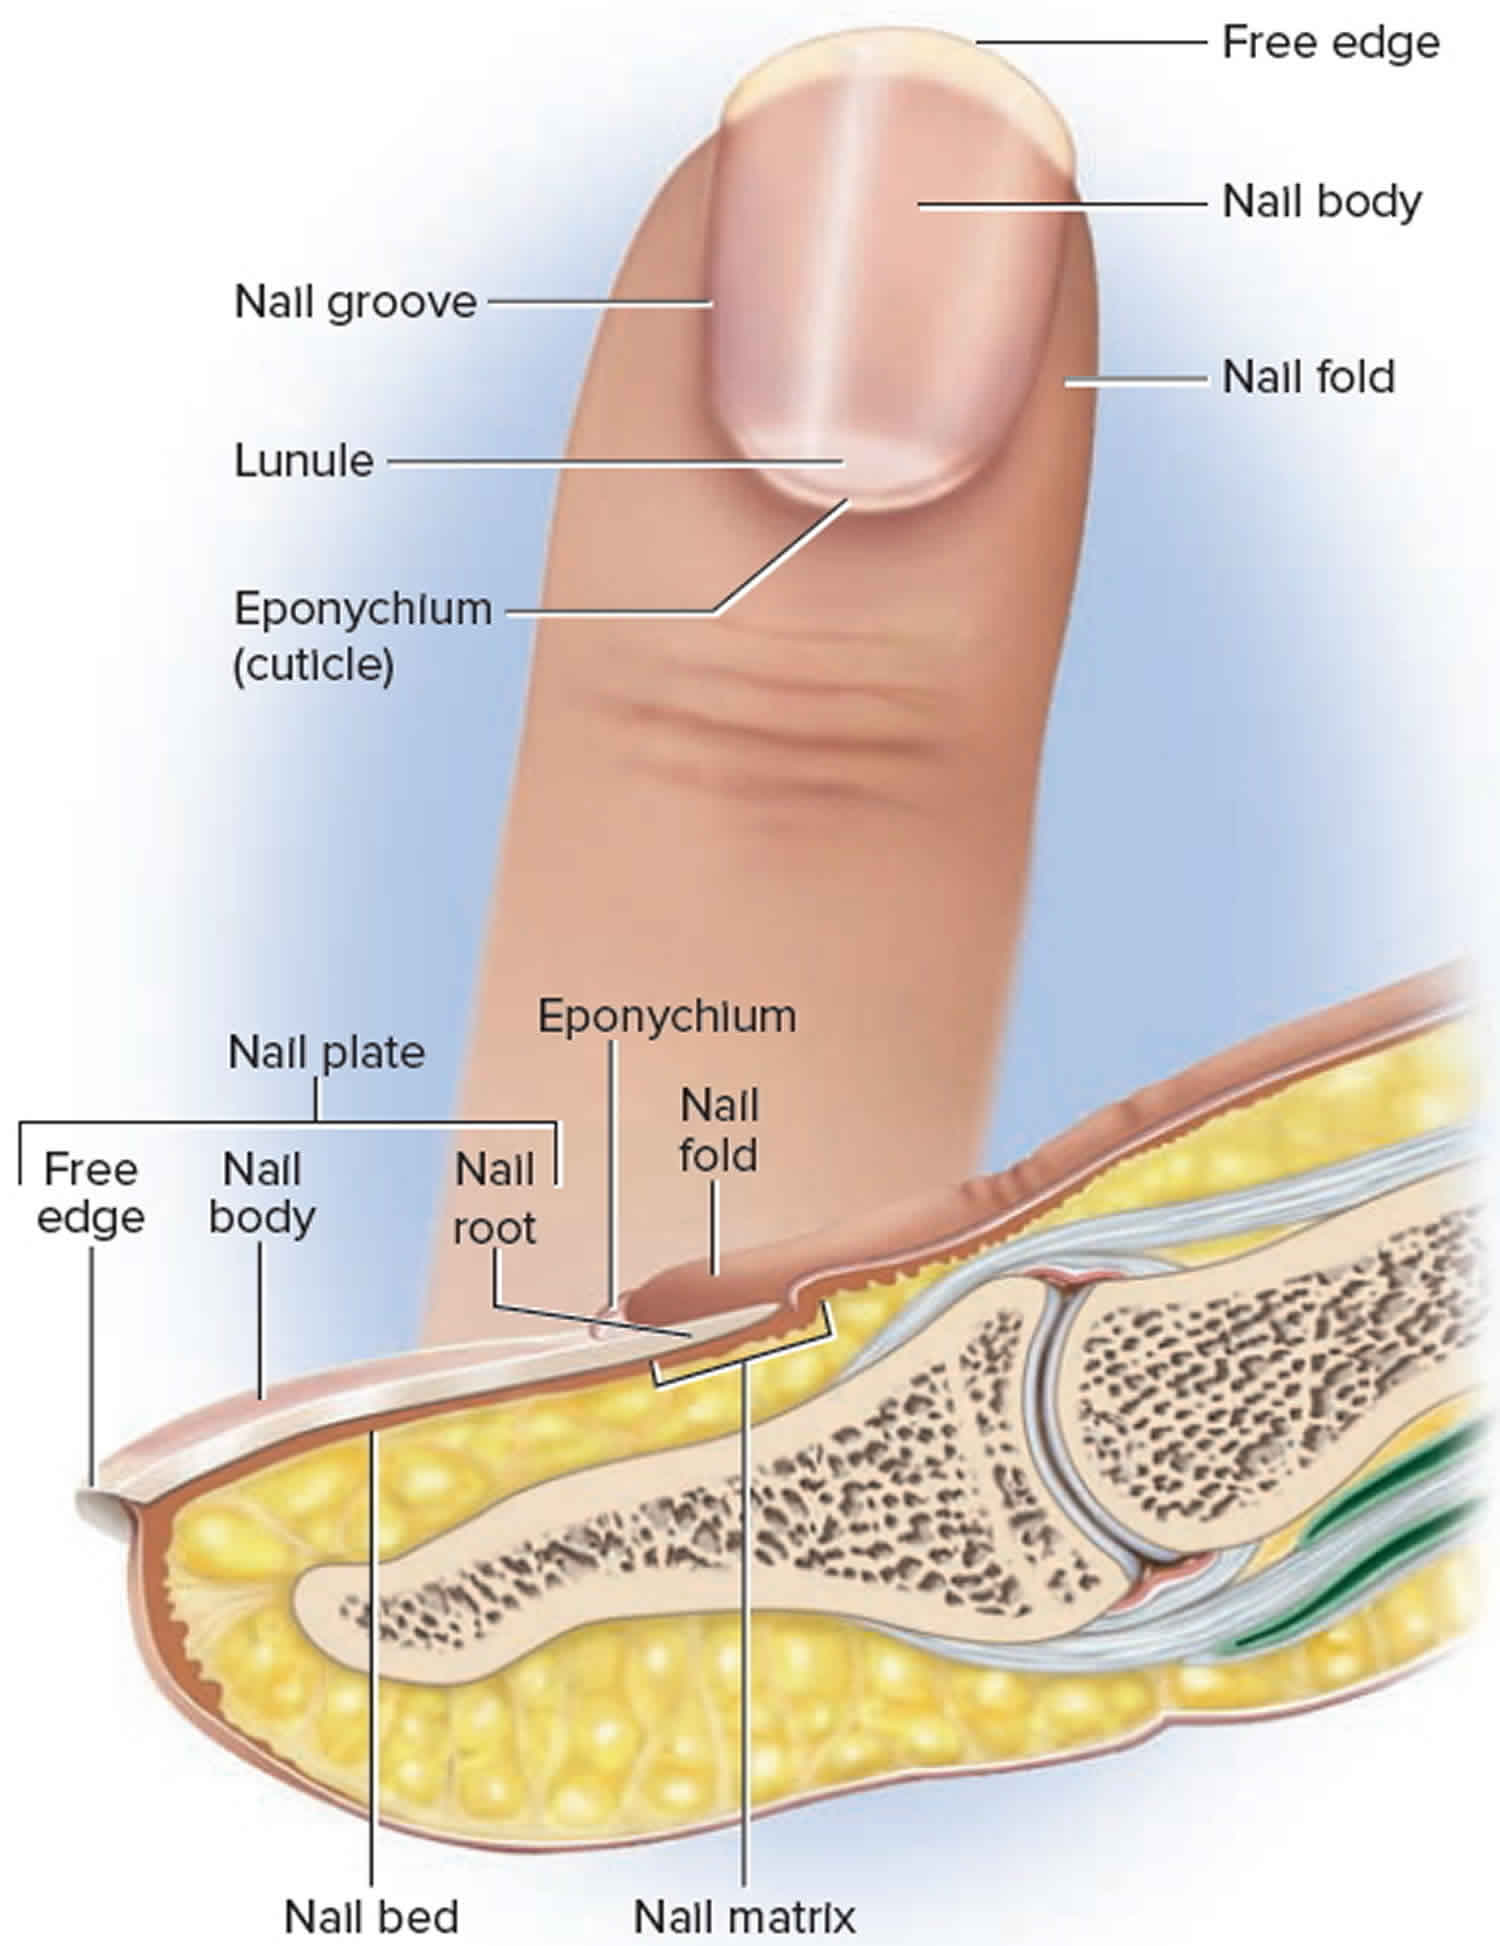 Black line on the nail: Causes, treatments, and pictures